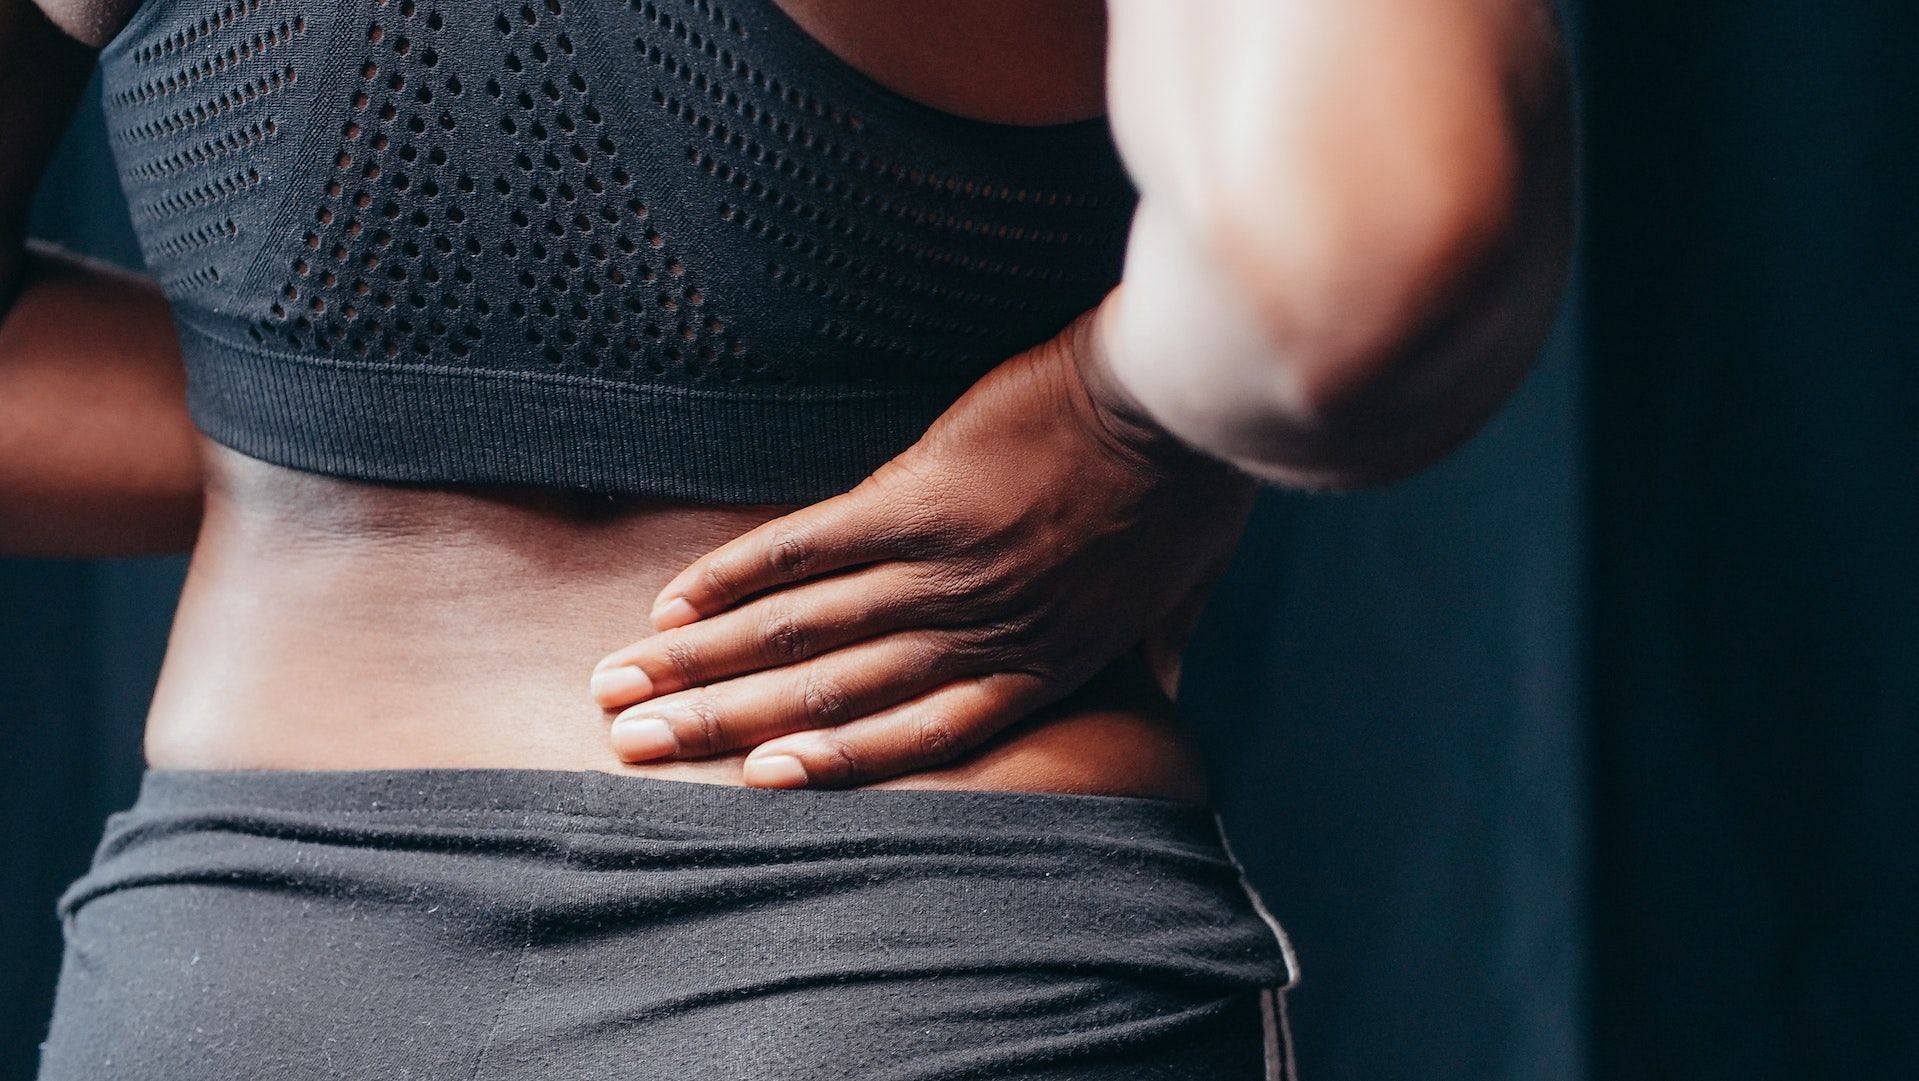 Spinal stenosis affects the entire lower back. (Photo via Pexels/Kindel Media)